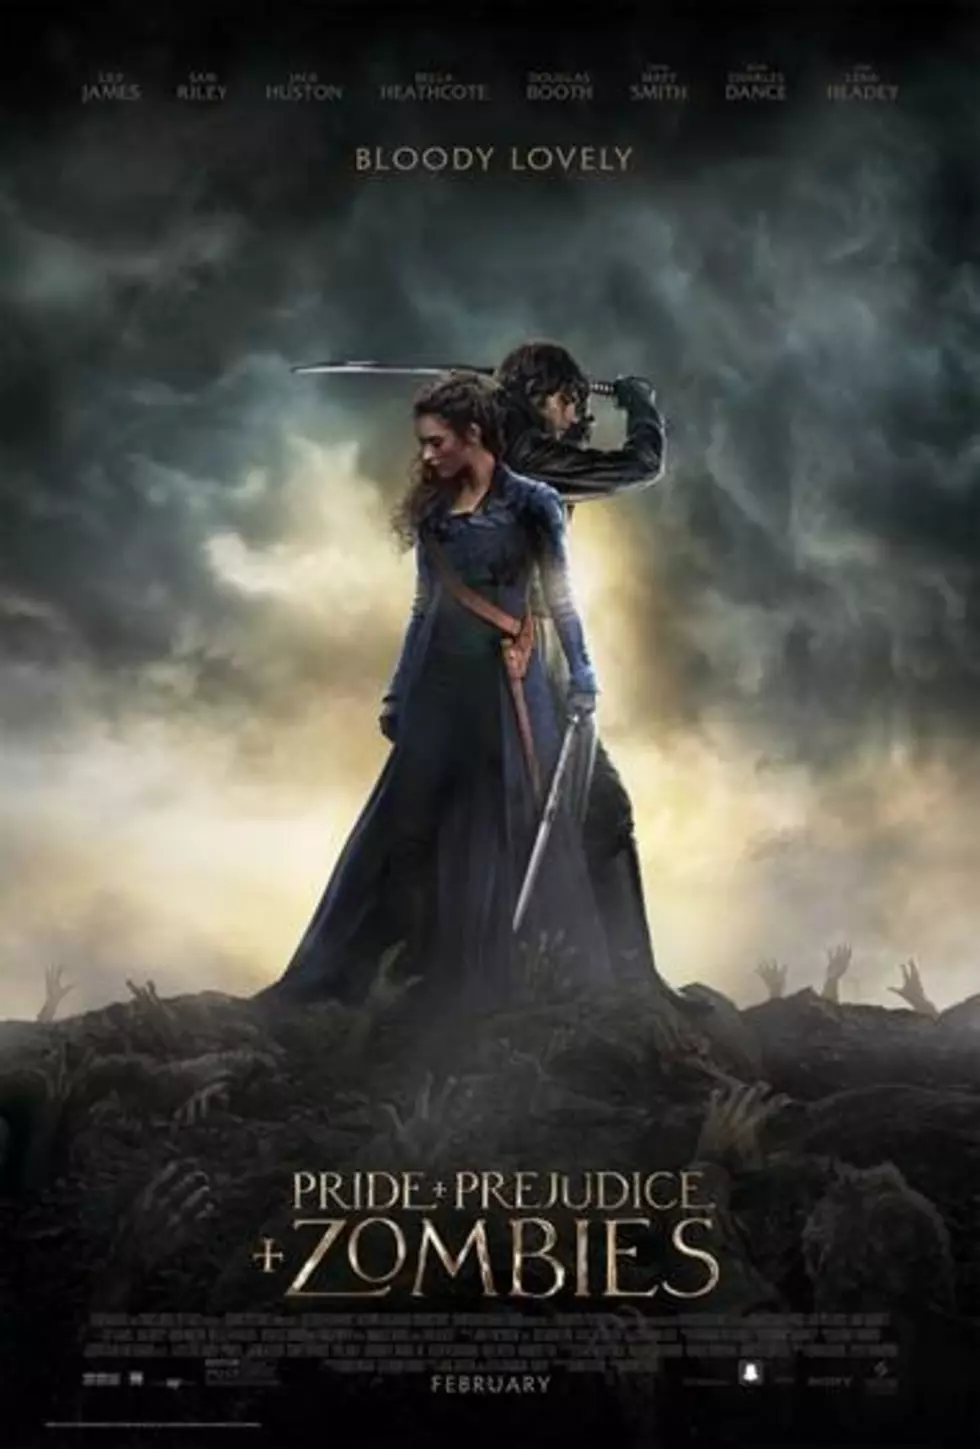 Get Access to a Special Pre-Screening of ‘Pride, Prejudice, and Zombies’